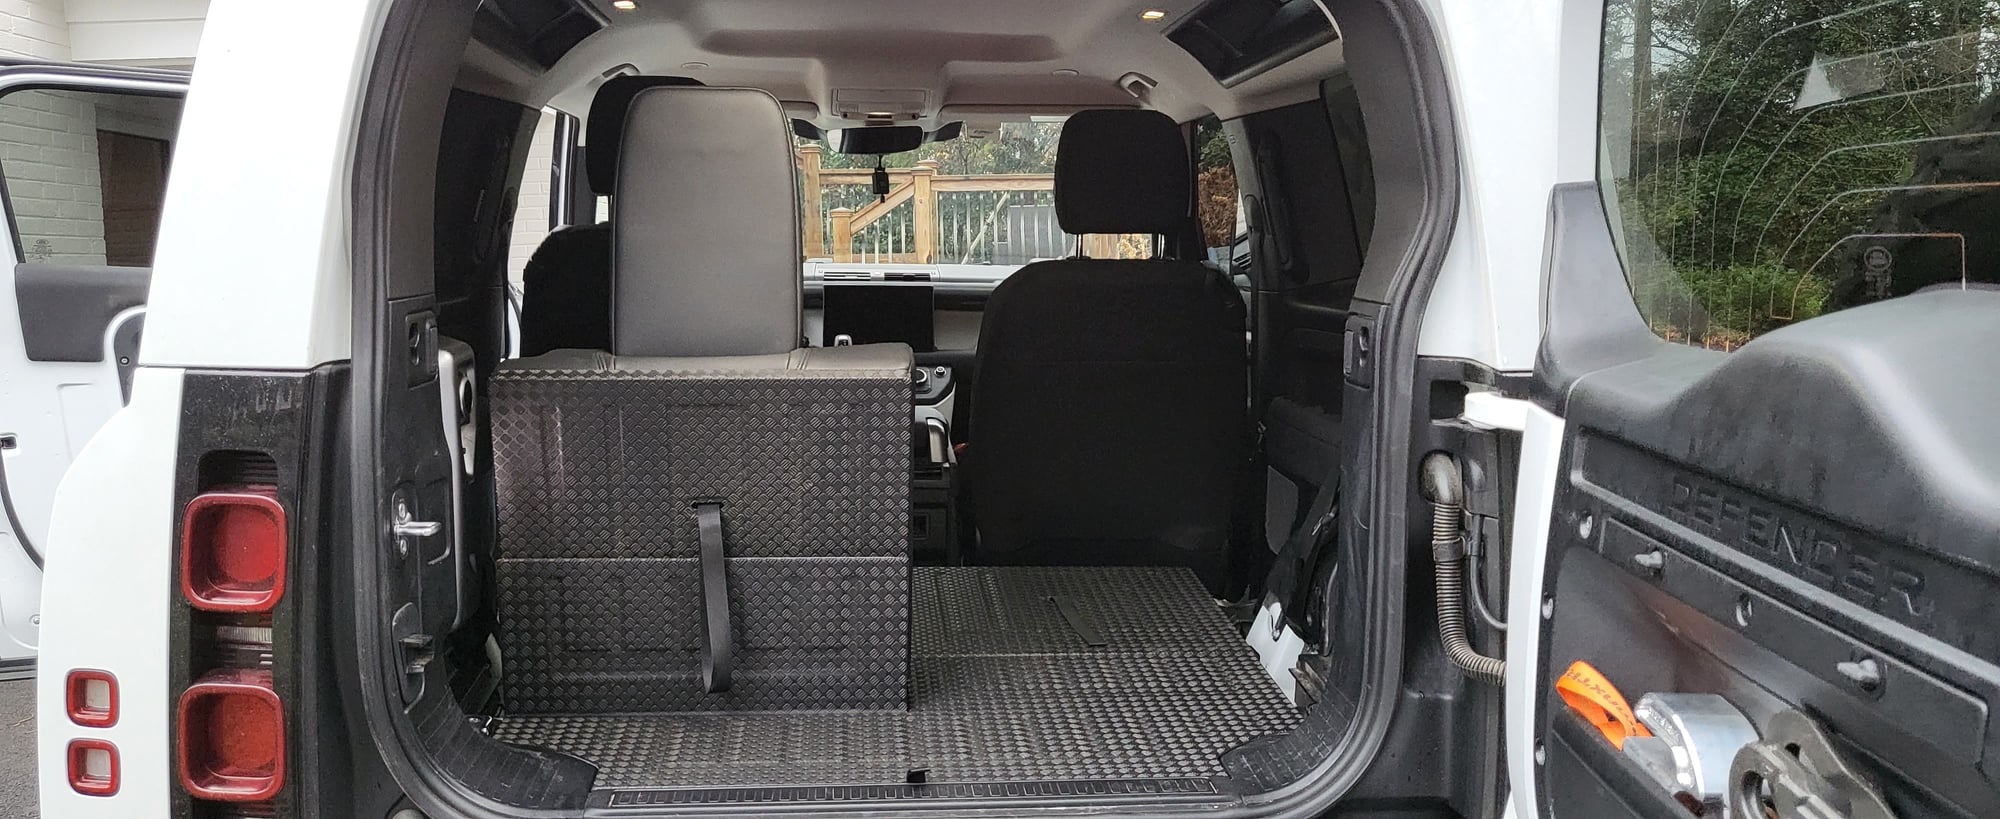 Defender Jumpseat - Land Rover Forums - Land Rover Enthusiast Forum